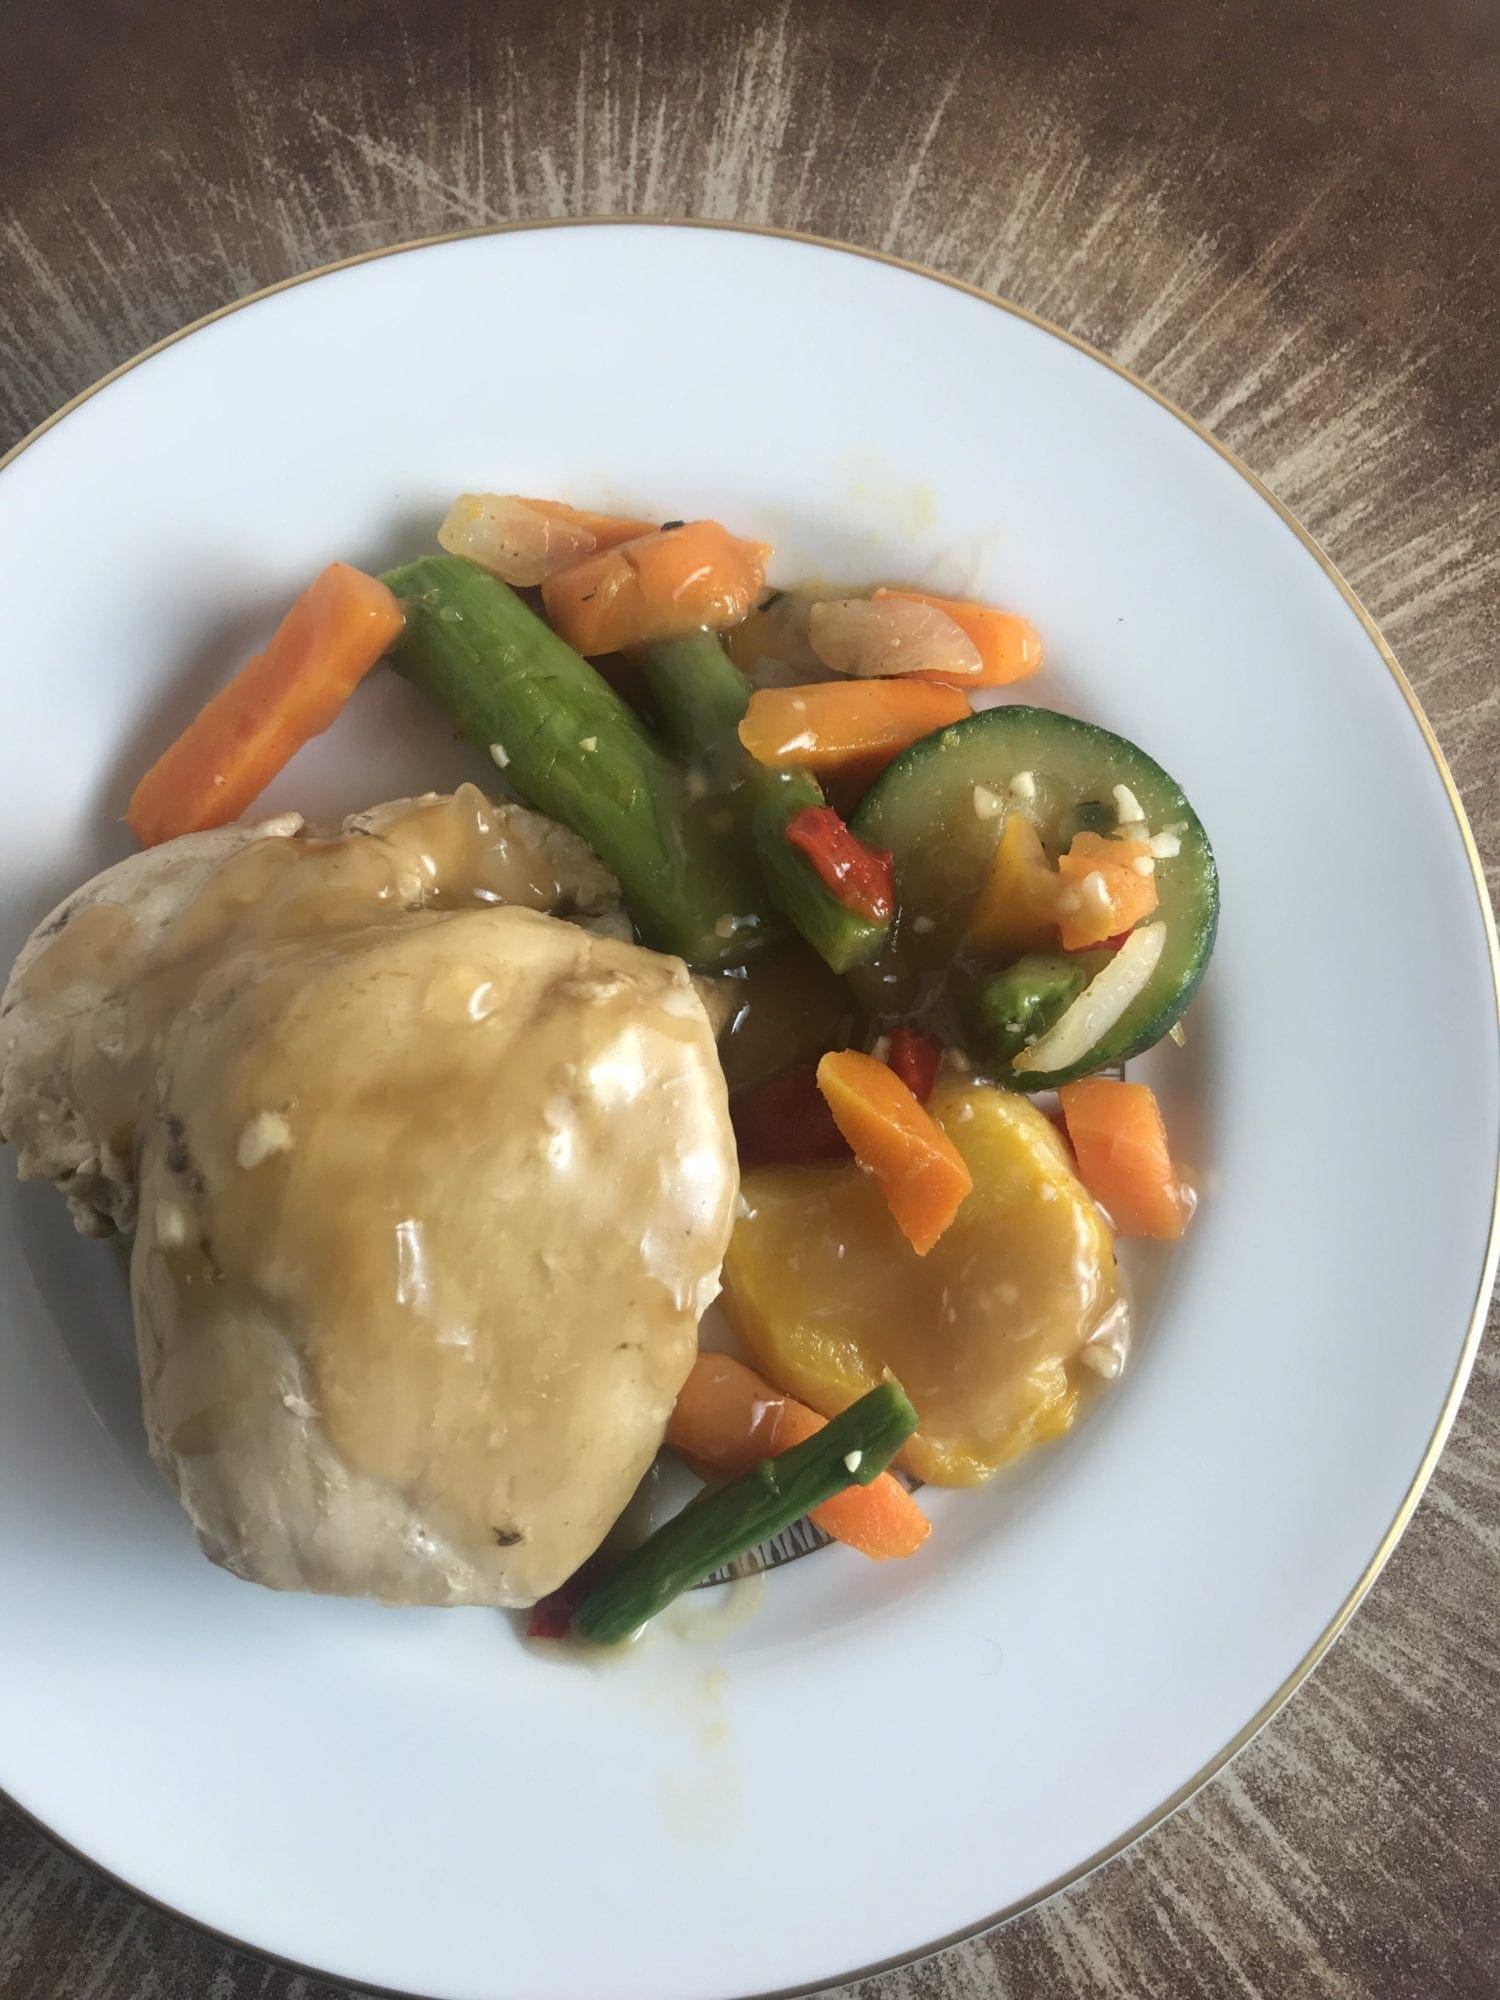 Spring Chicken and Vegetables w/ Sweet Gravy - Just 2 WW FreeStyle SmartPoints per serving